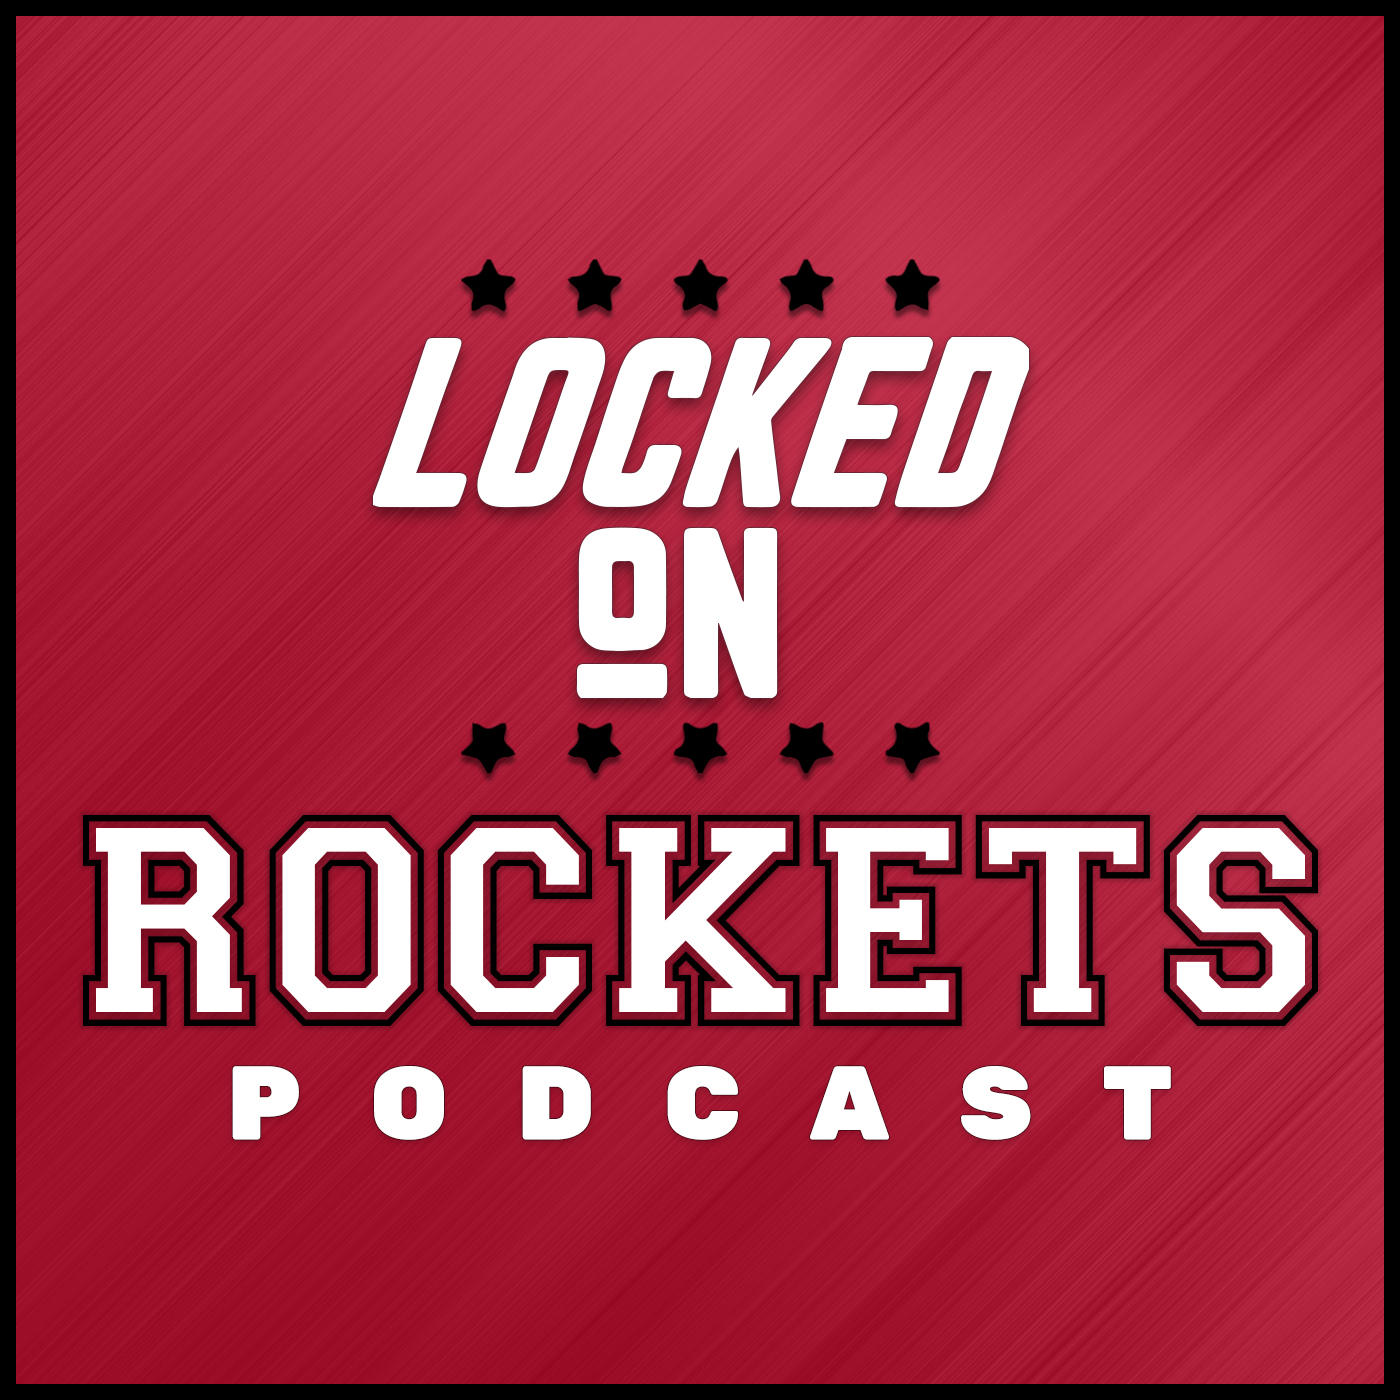 Ready go to ... https://link.chtbl.com/LORockets?sid=YouTube [ Locked On Rockets - Daily Podcast On The Houston Rockets]